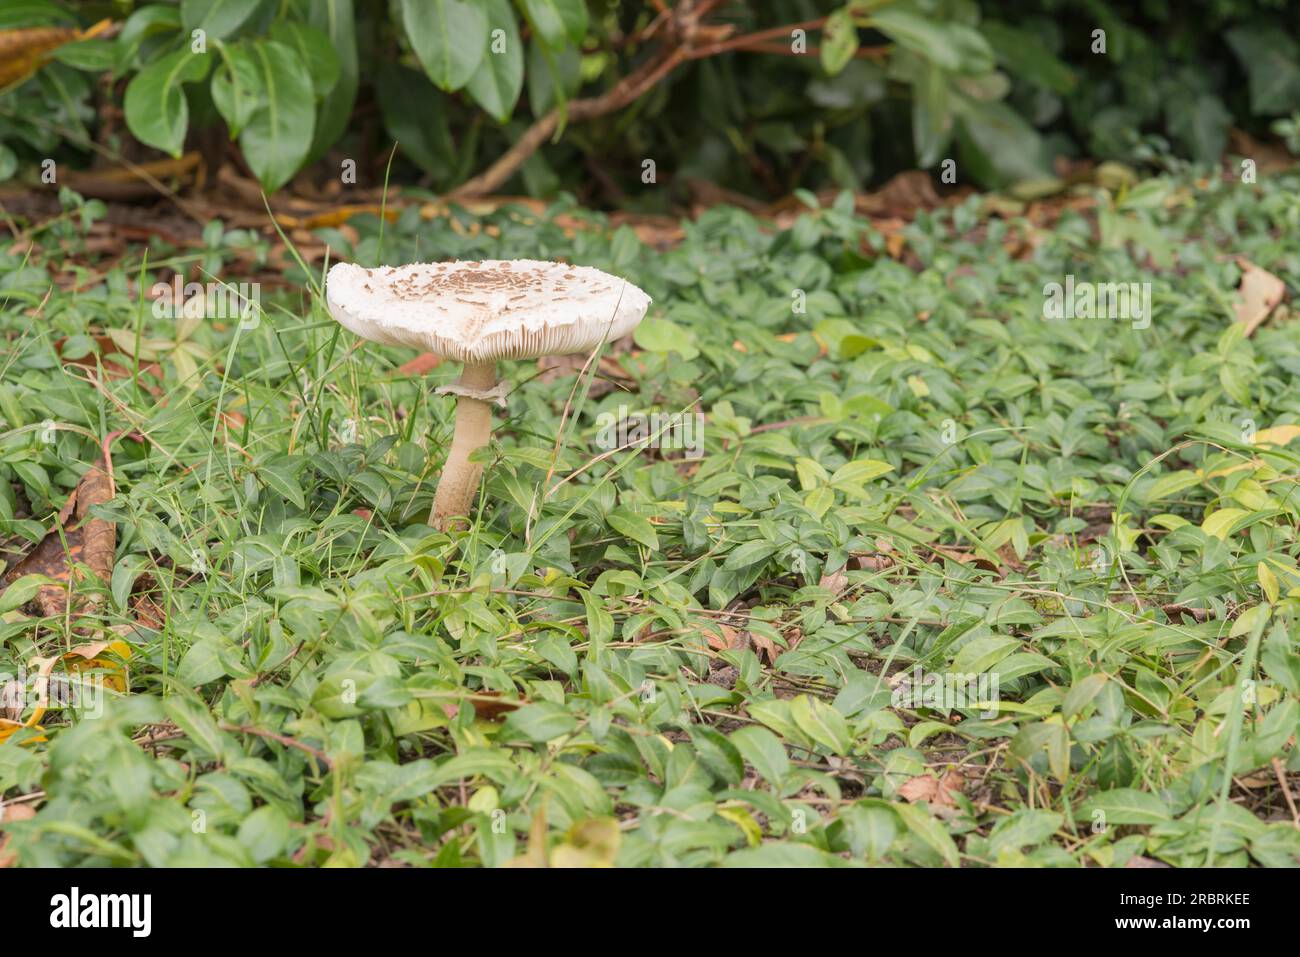 Large shaggy parasol, or Macrolepiota venenata, a common edible mushroom found alongside hedges and woodland growing outdoors in a garden Stock Photo